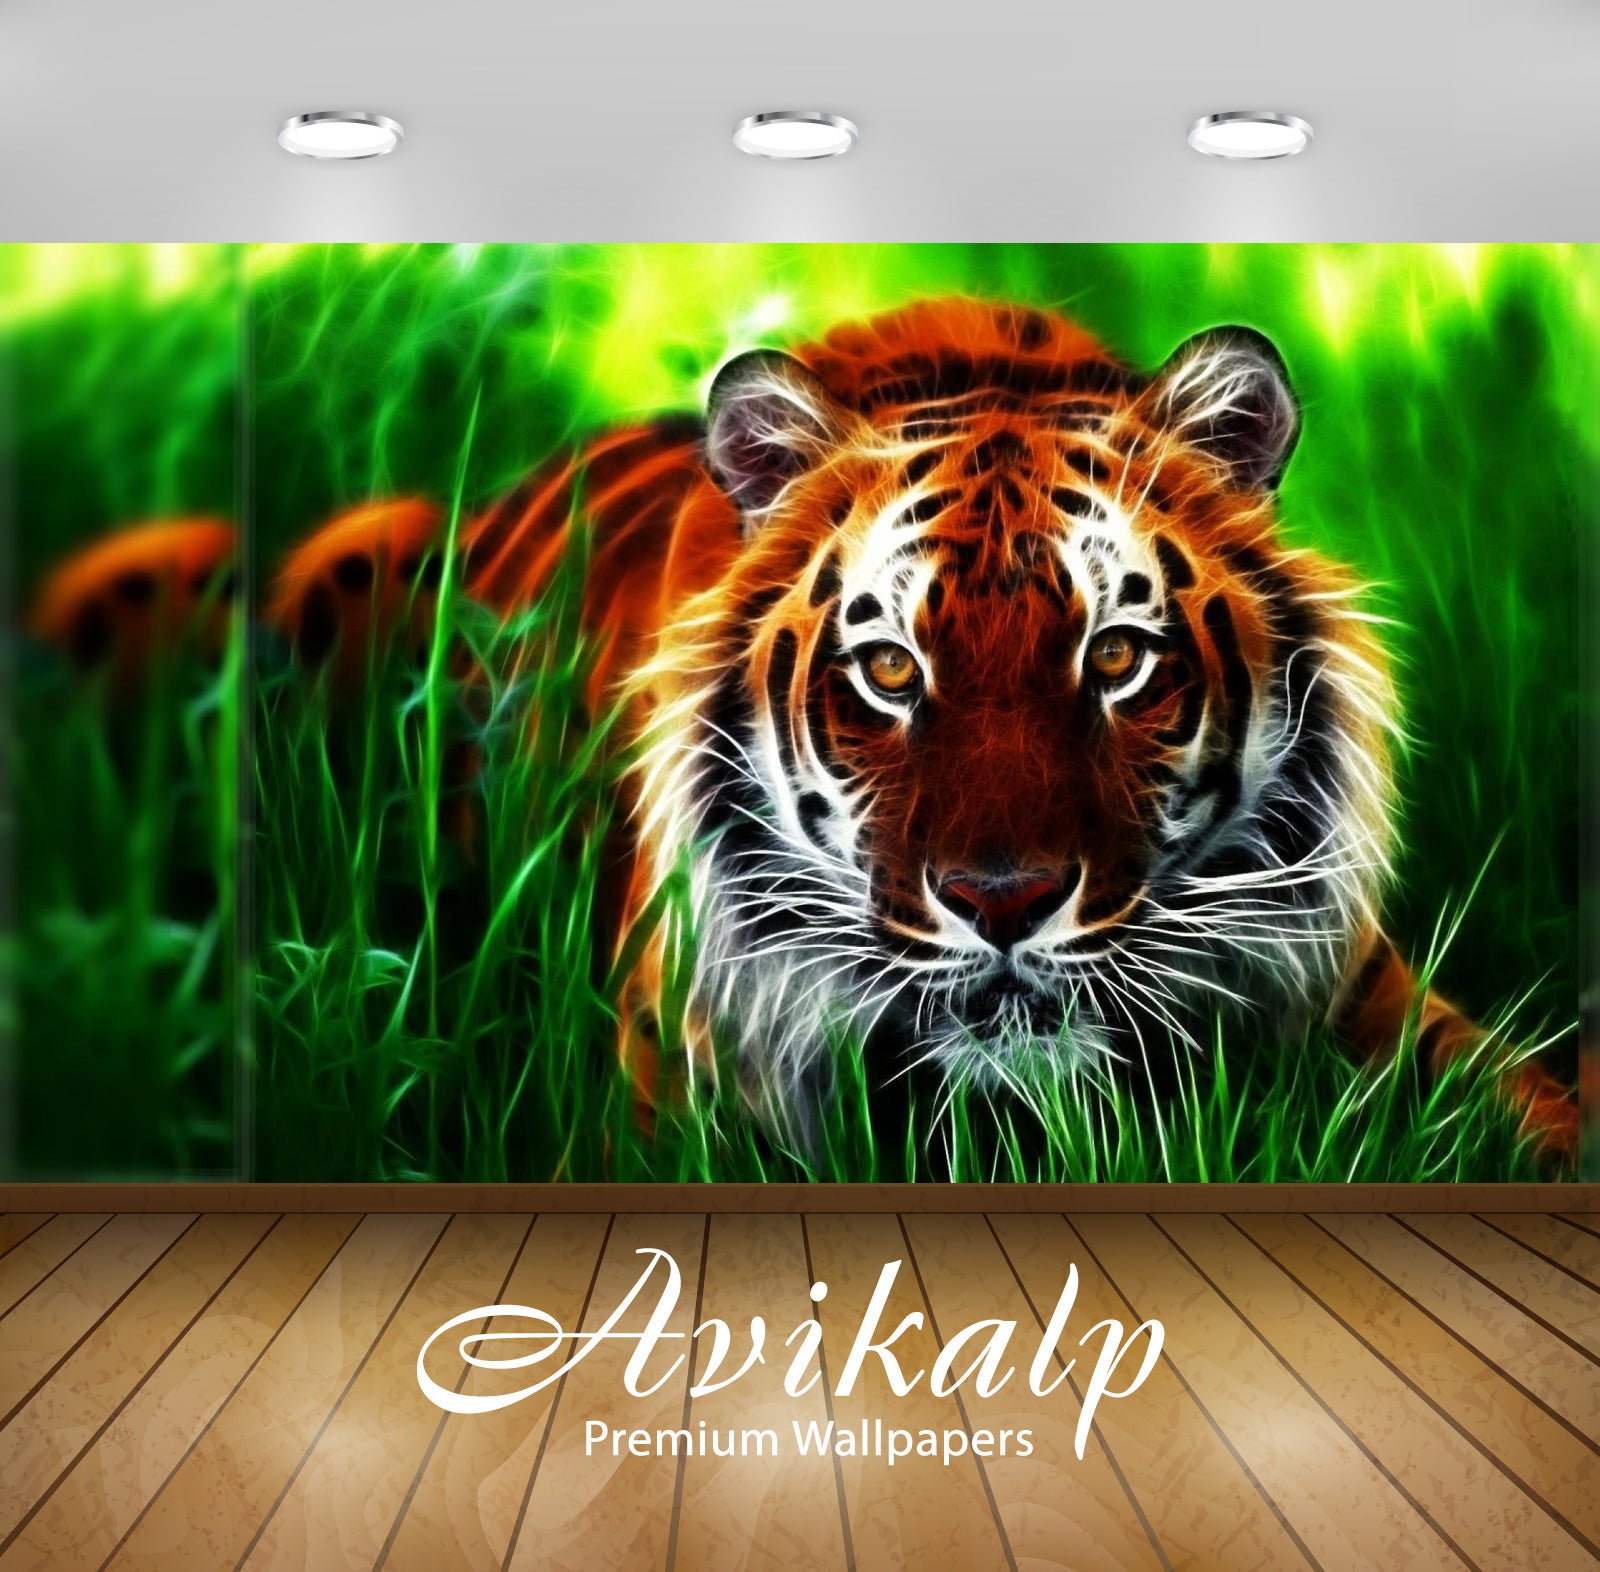 Avikalp Exclusive Awi2155 Tiger Digital  Full HD Wallpapers for Living room, Hall, Kids Room, Kitche